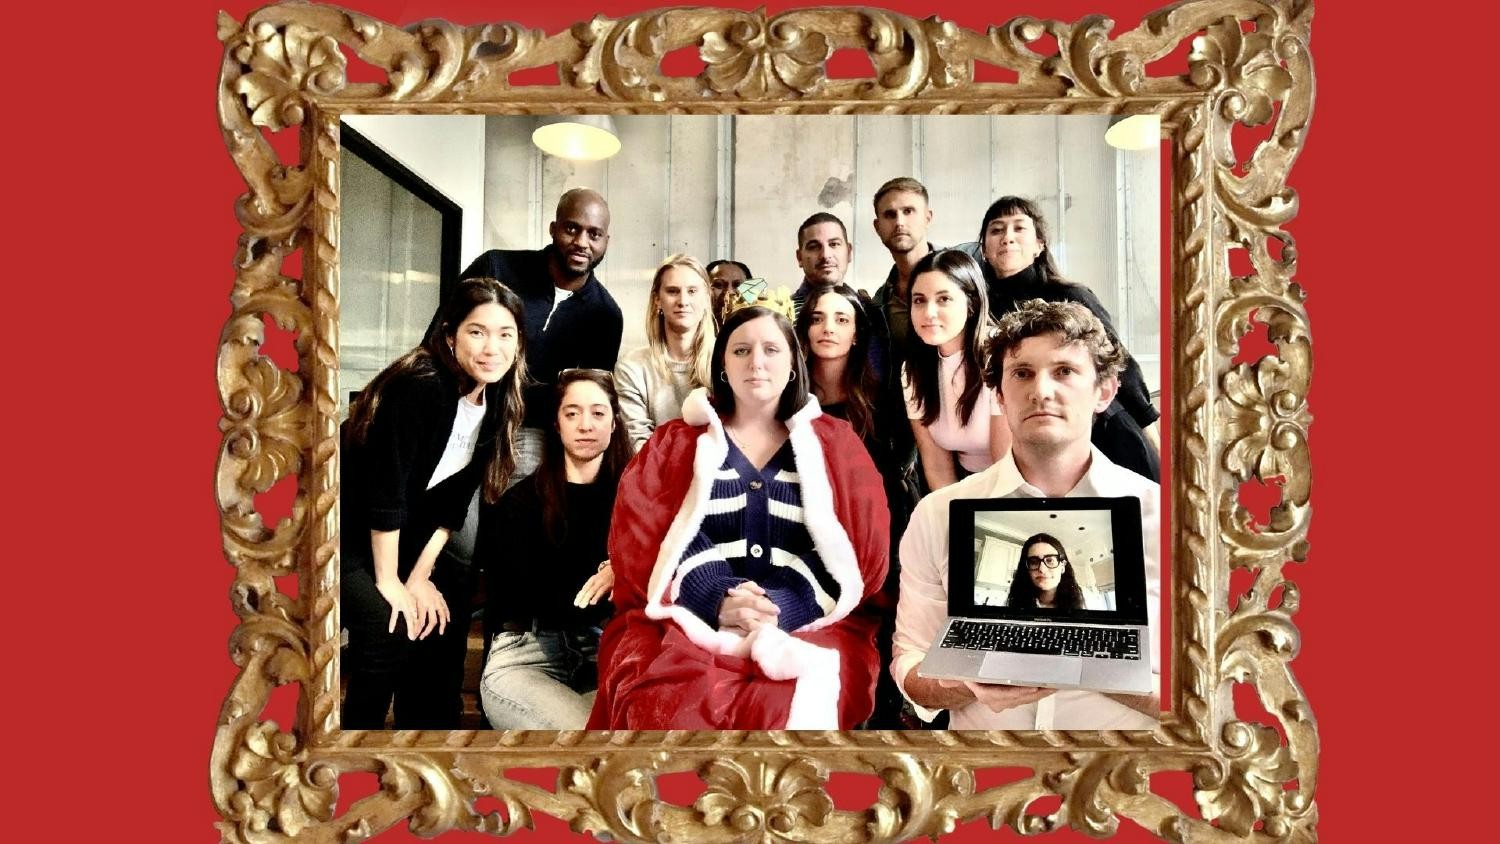 Royal coronation ceremony at our NYC office